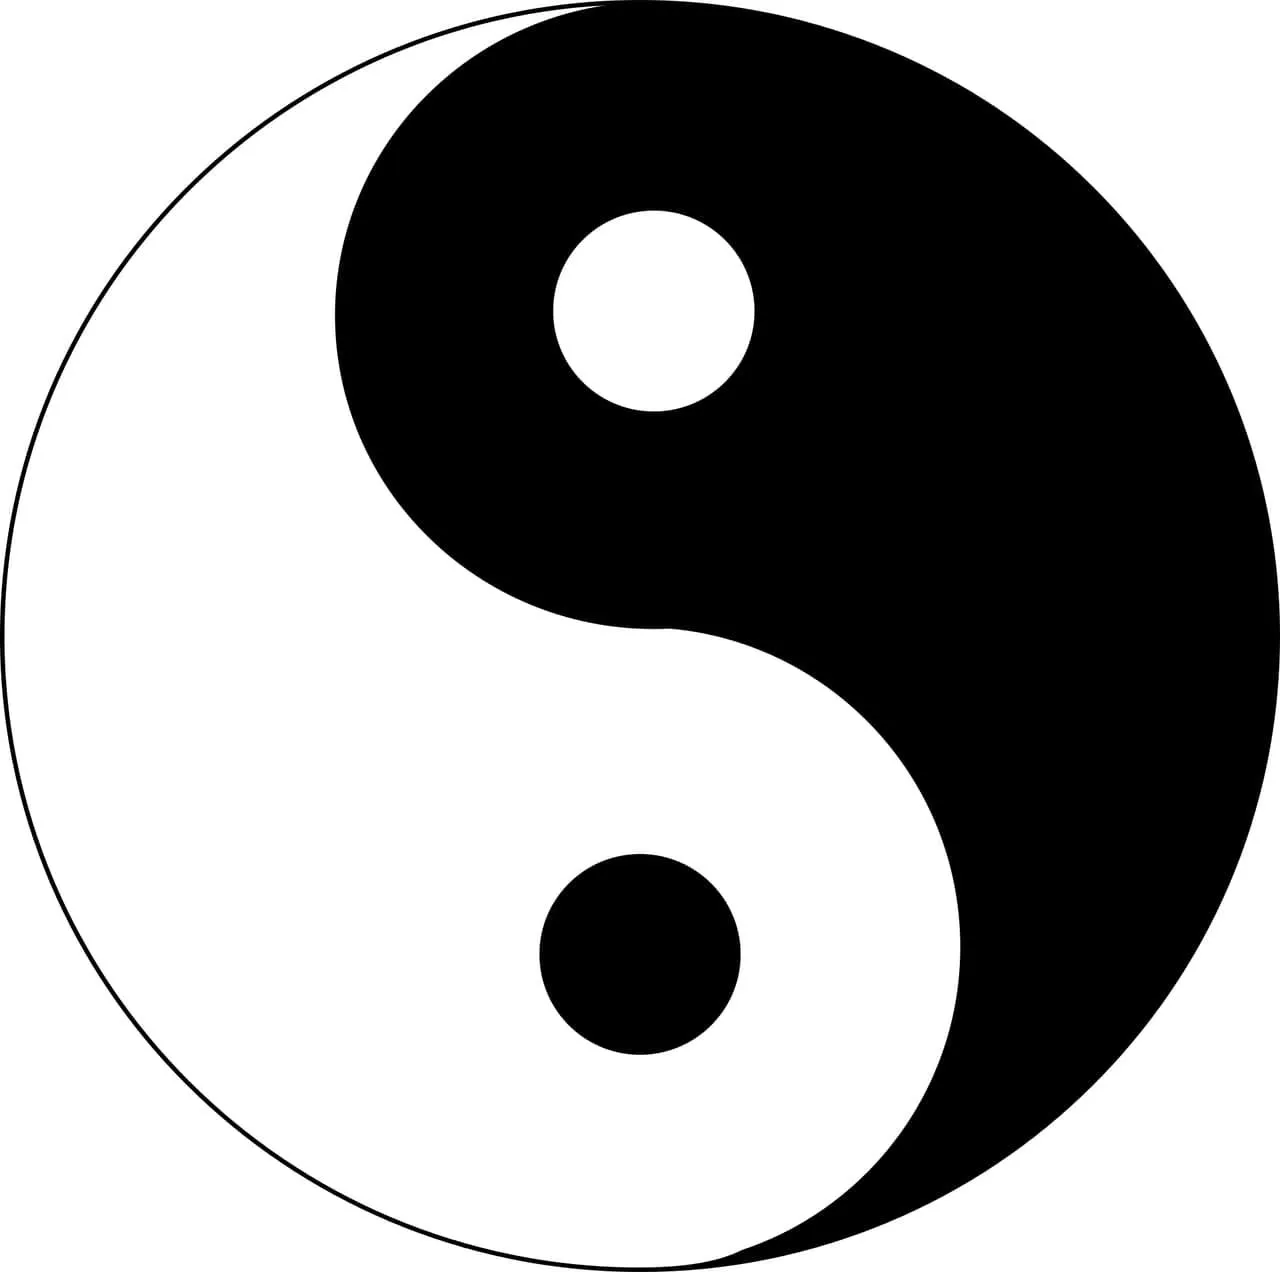 Yin Yang love quotes are really popular.